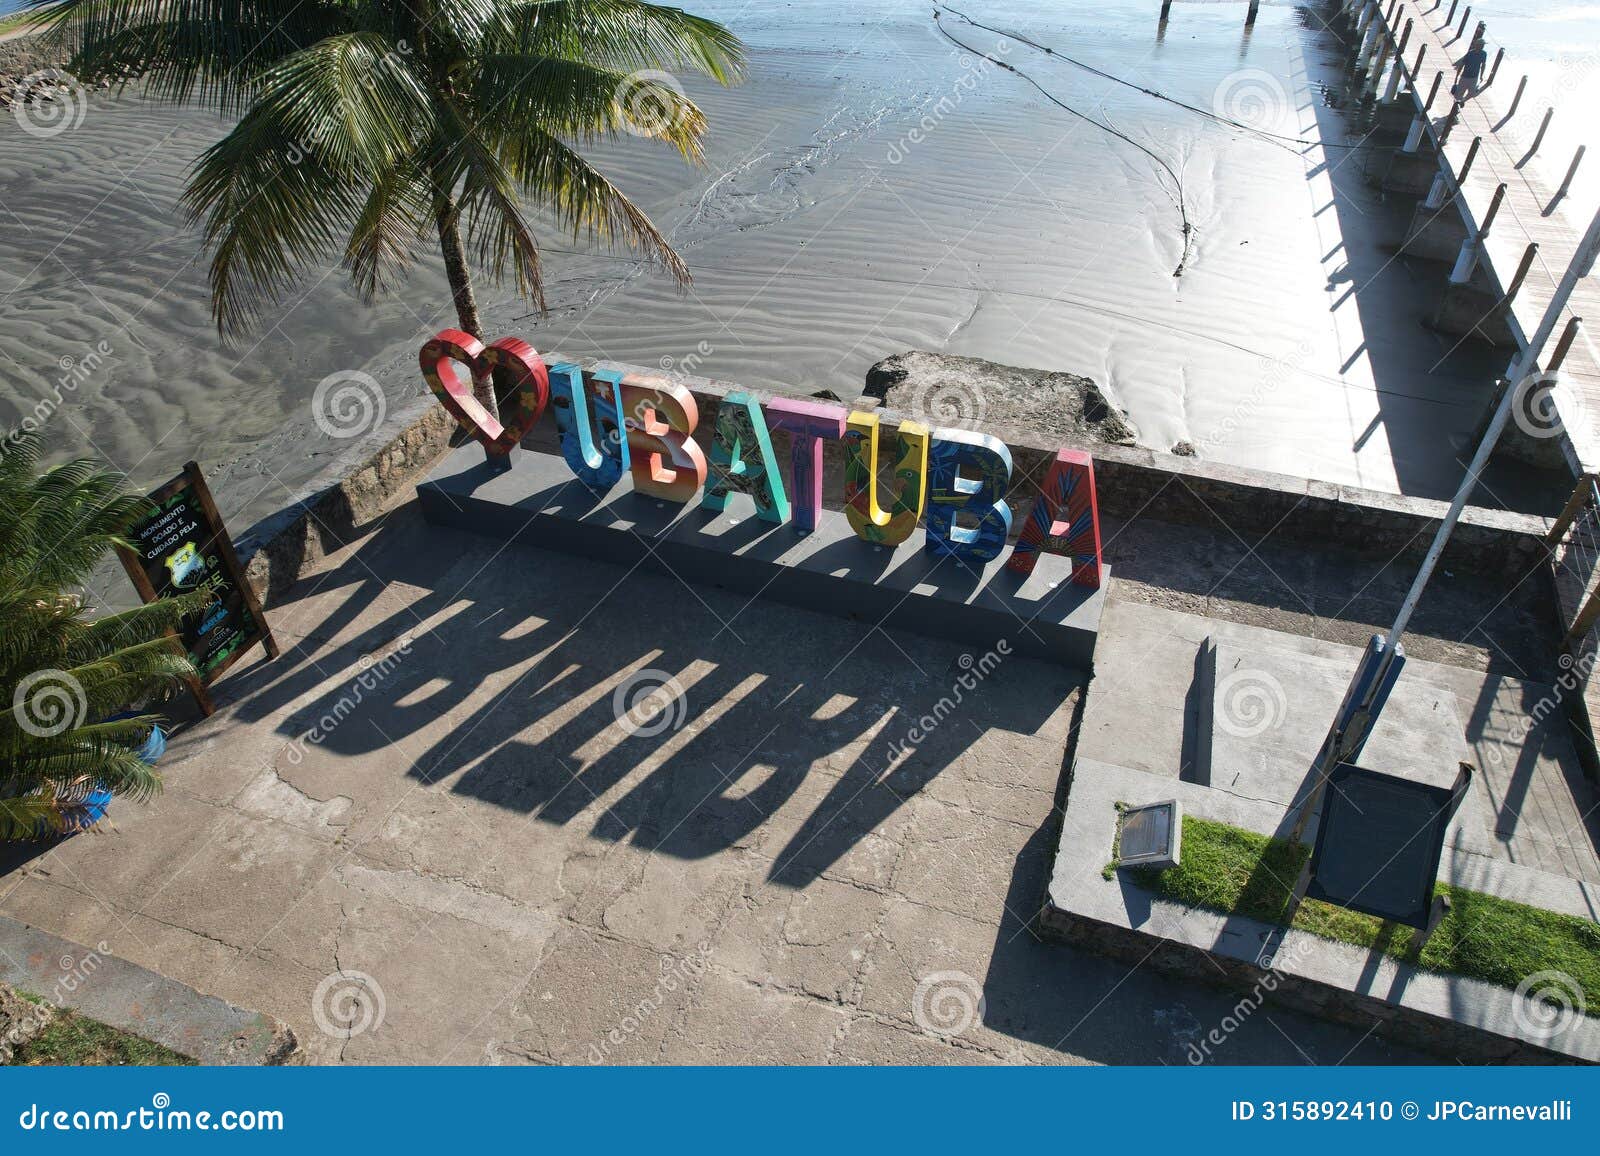 welcome sign of ubatuba, seen from drone